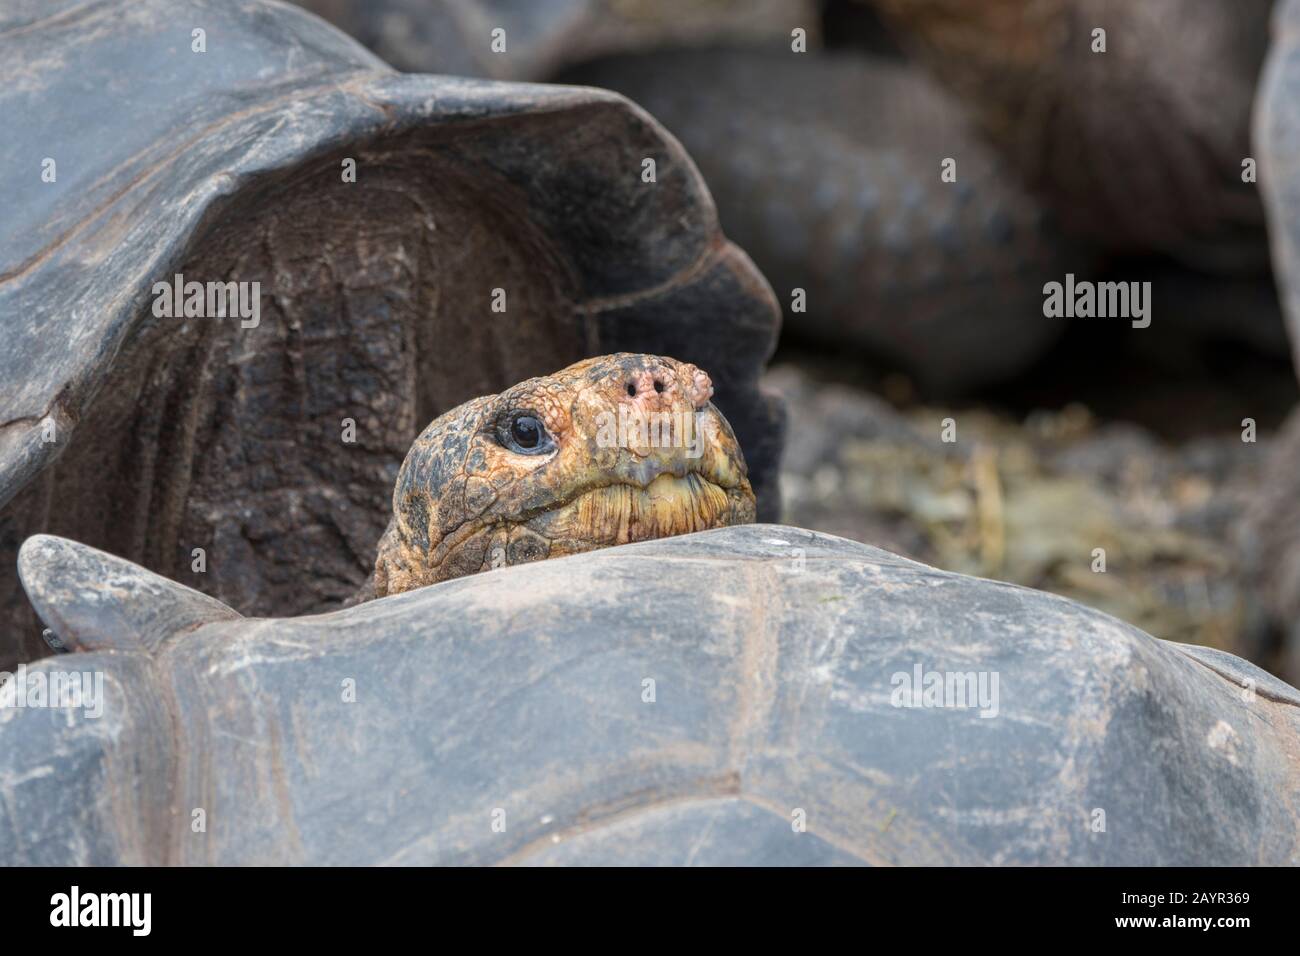 Close-up of a Giant tortoise at the Charles Darwin Research Station in Puerto Ayora on Santa Cruz Island (Indefatigable) in the Galapagos Islands, Ecu Stock Photo